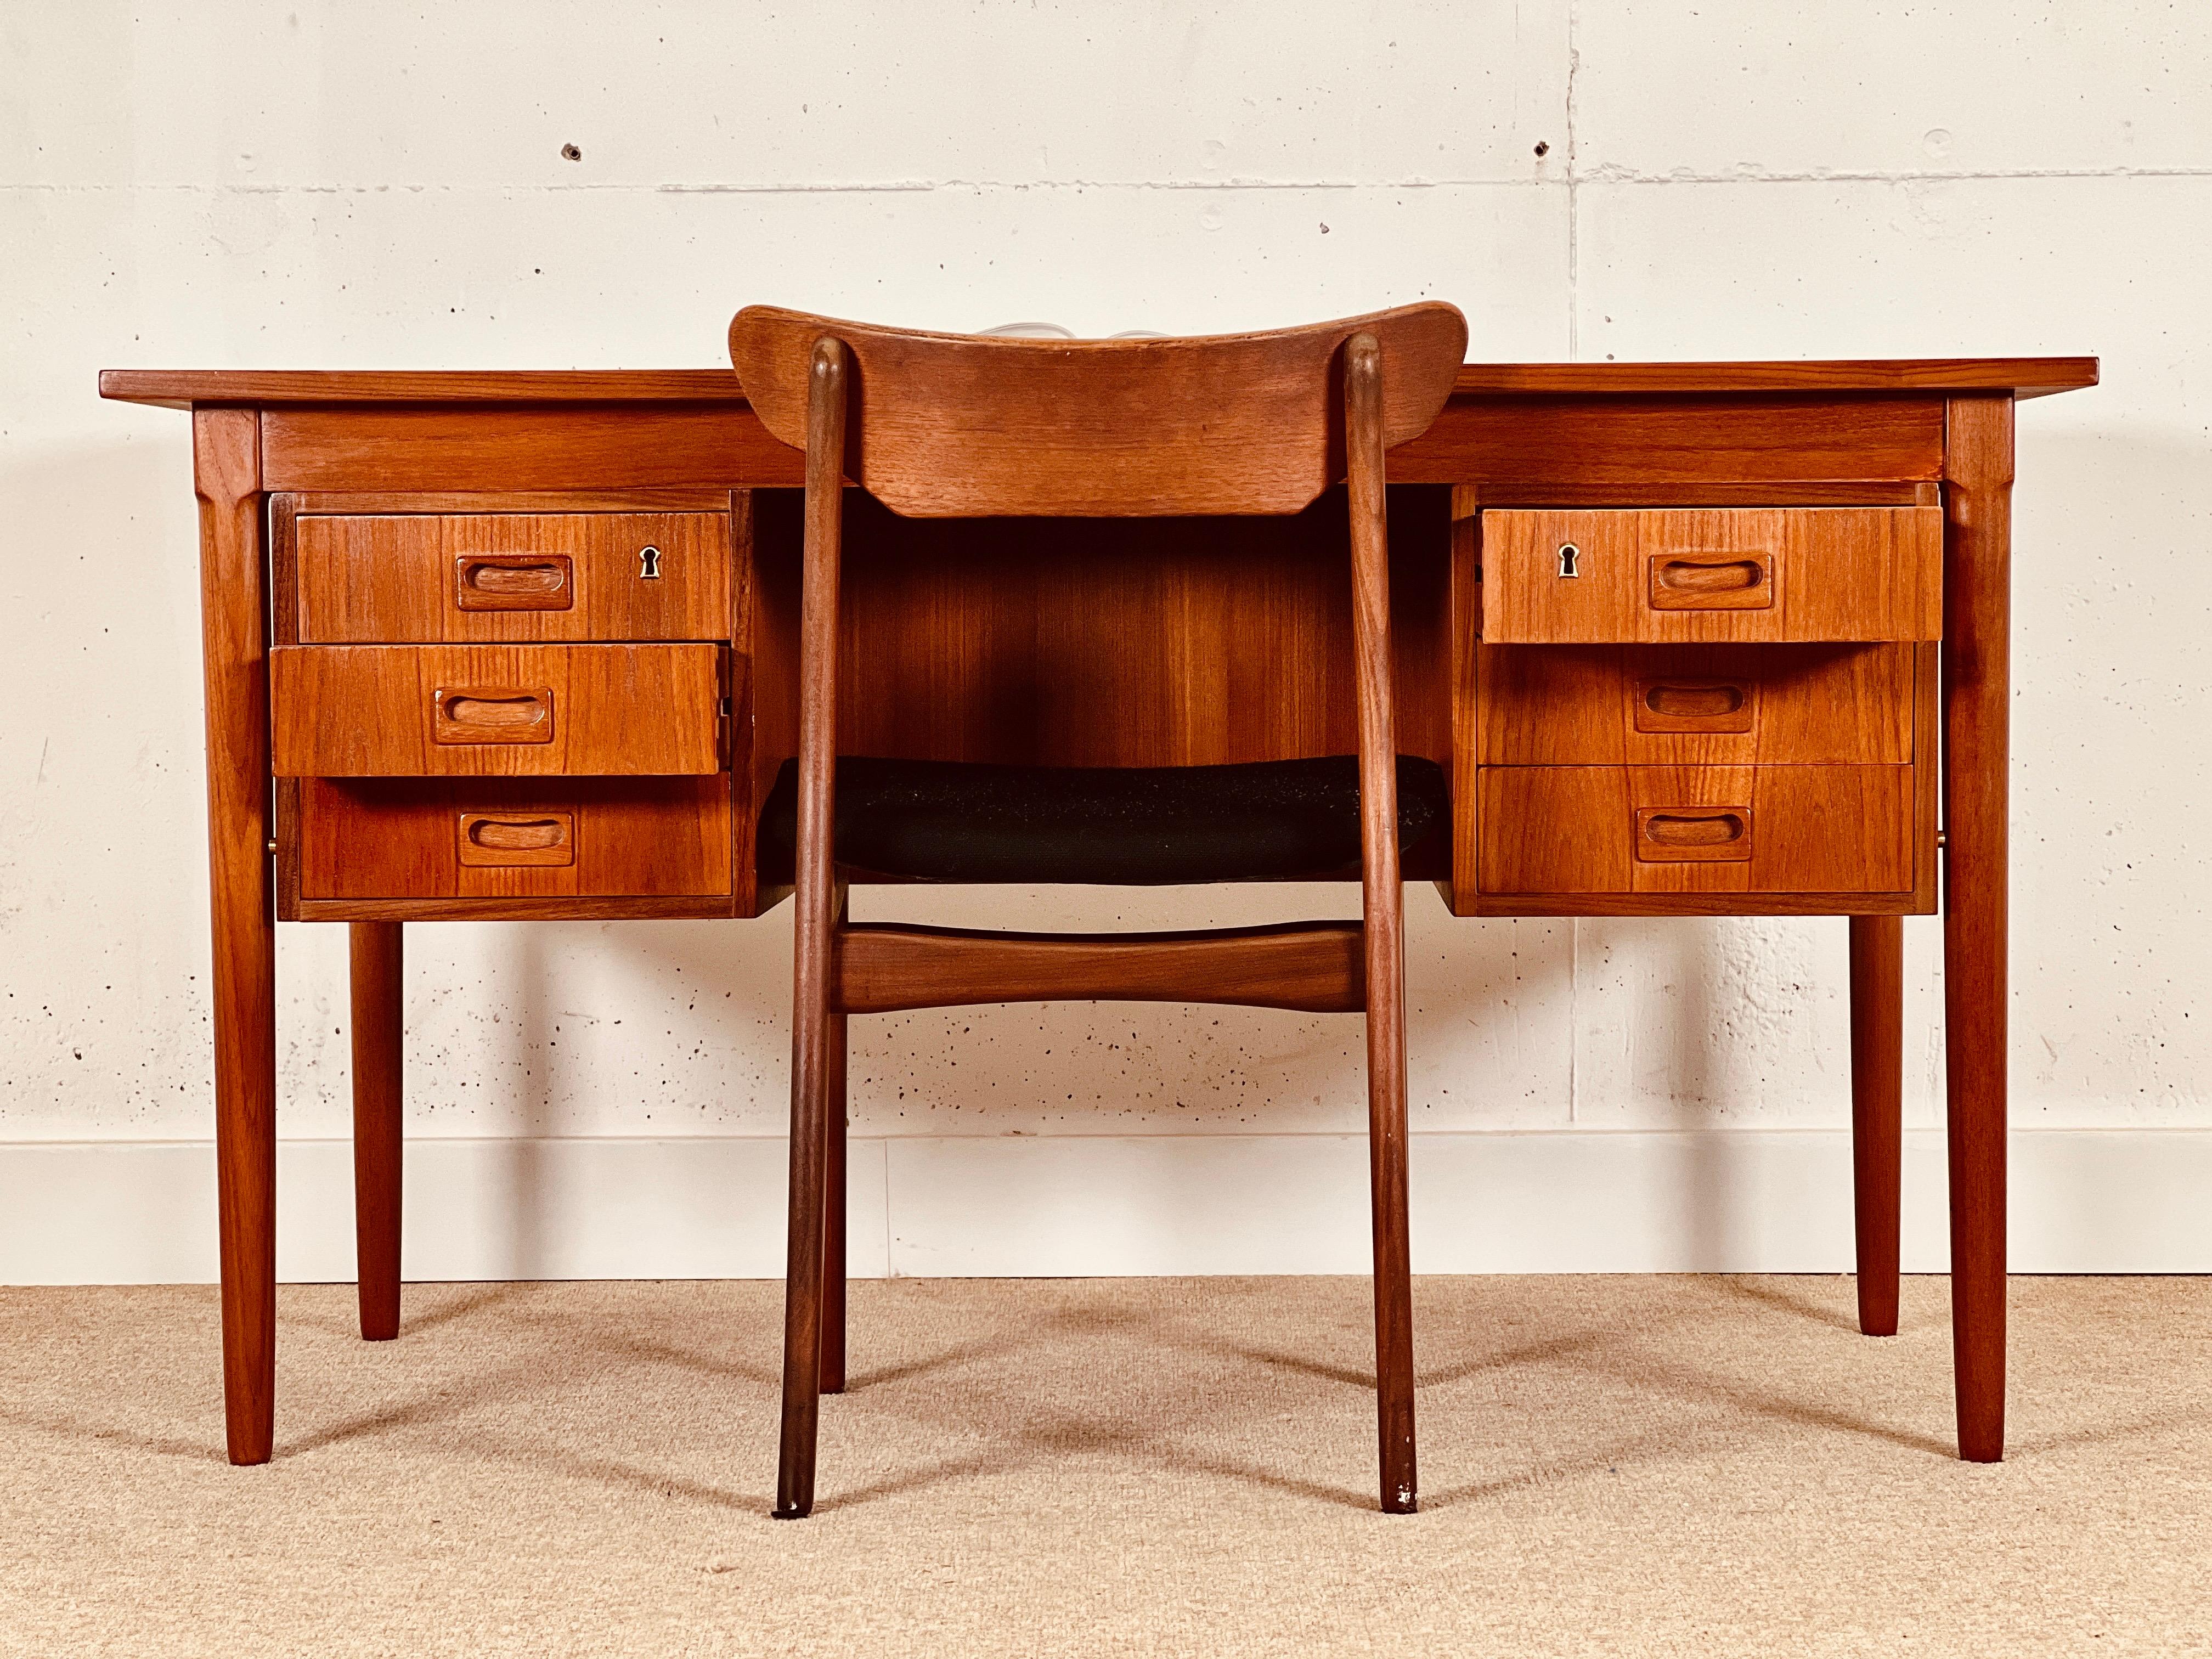 The desk is a masterpiece made by expert Danish cabinet makers.

The desk has beautifully shaped legs shaping its structure, with six drawers and a helpful bookcase at the back. With a vibrant teakwood, the desk is completely restored and in full